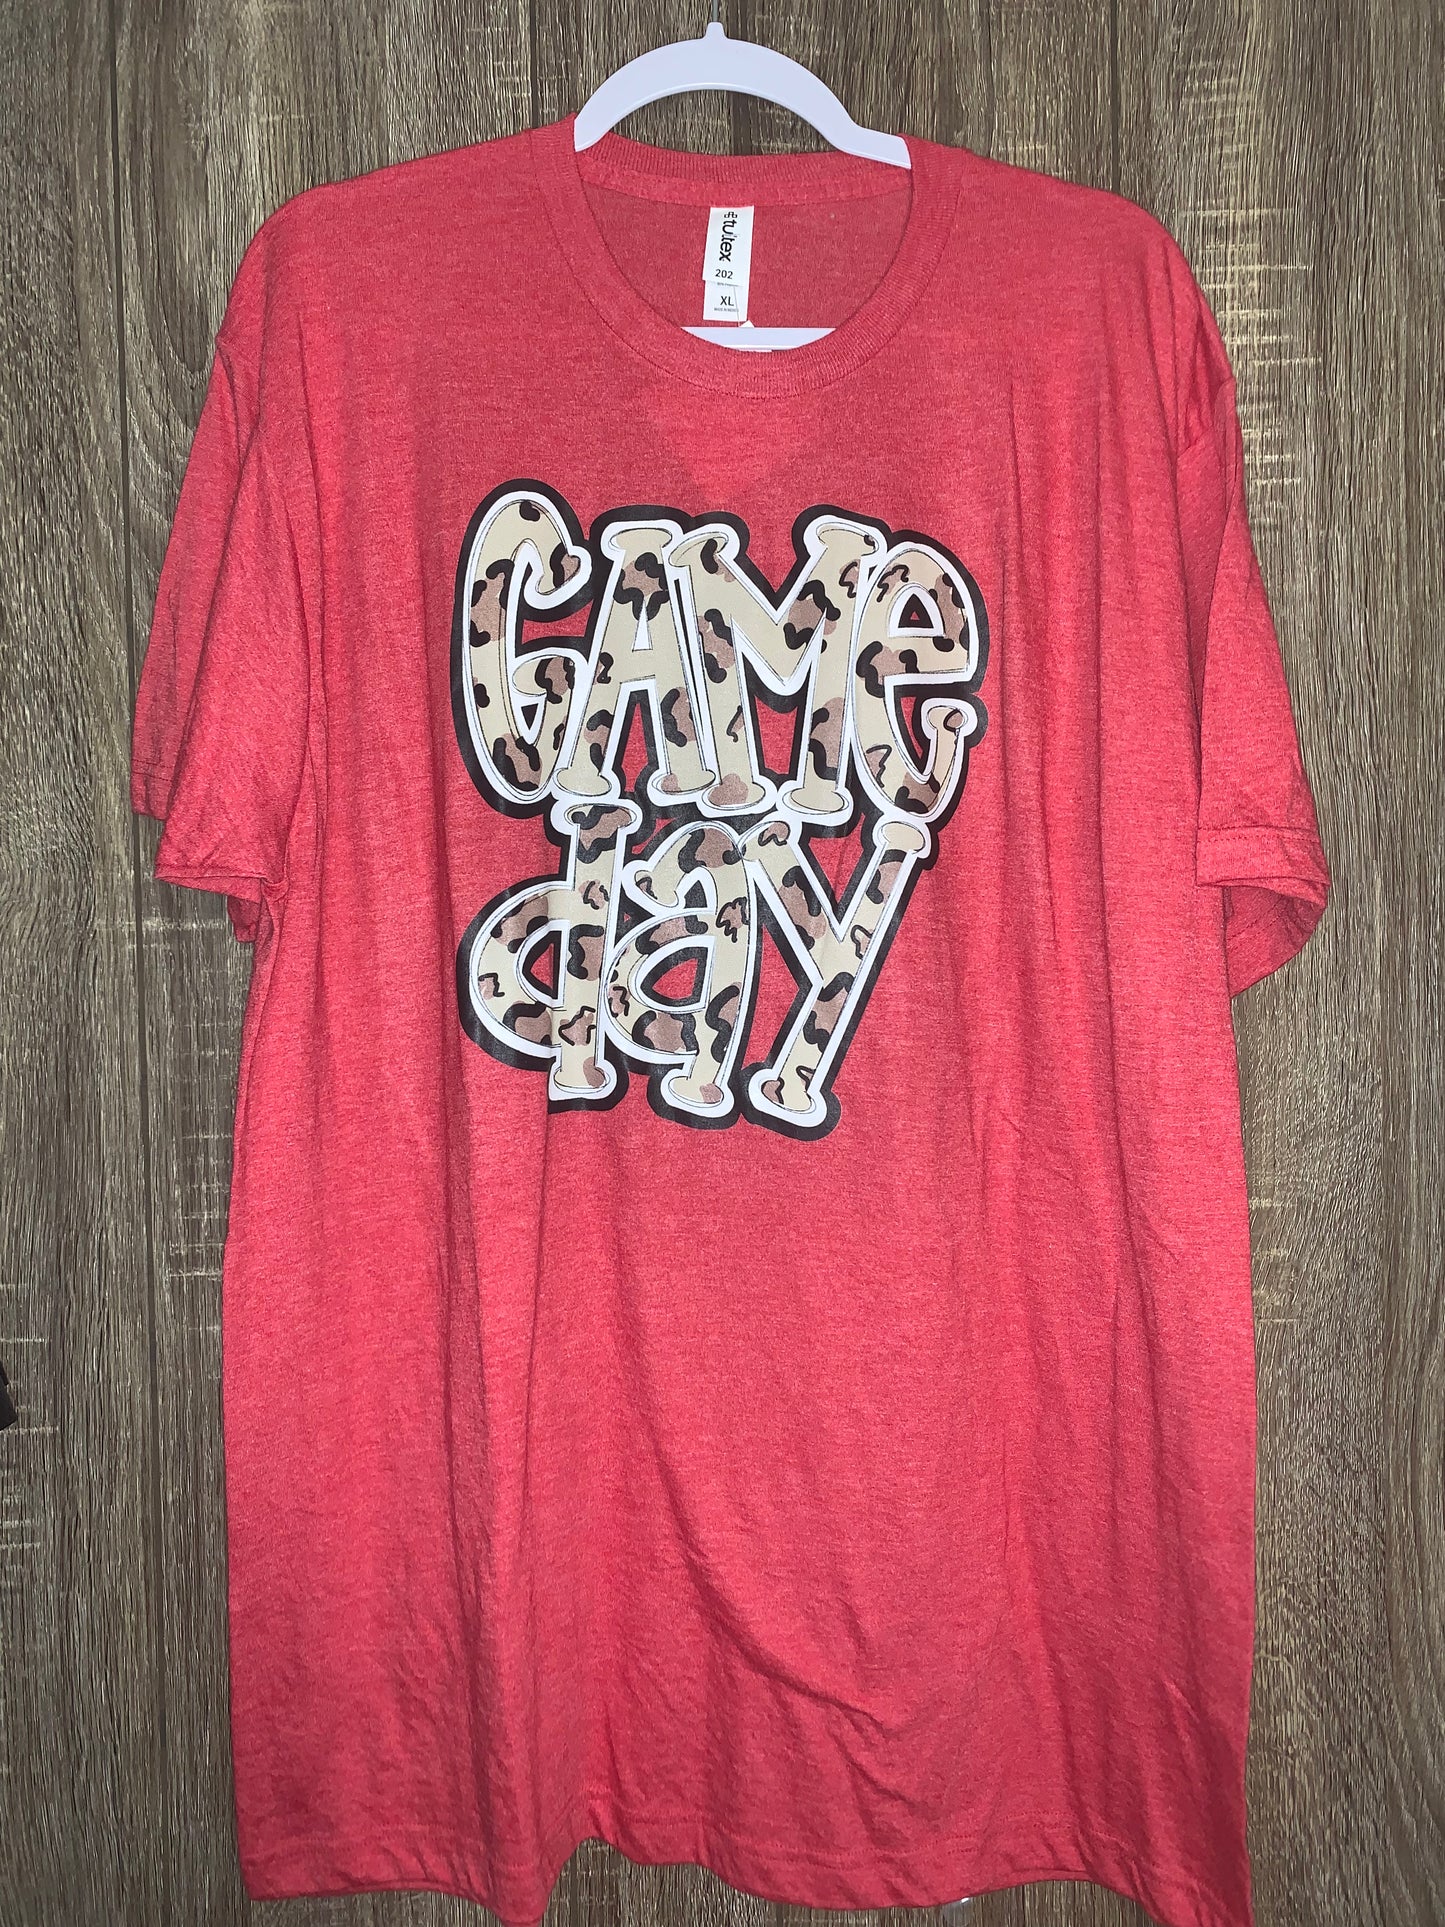 XL “Red Game Day” Tee